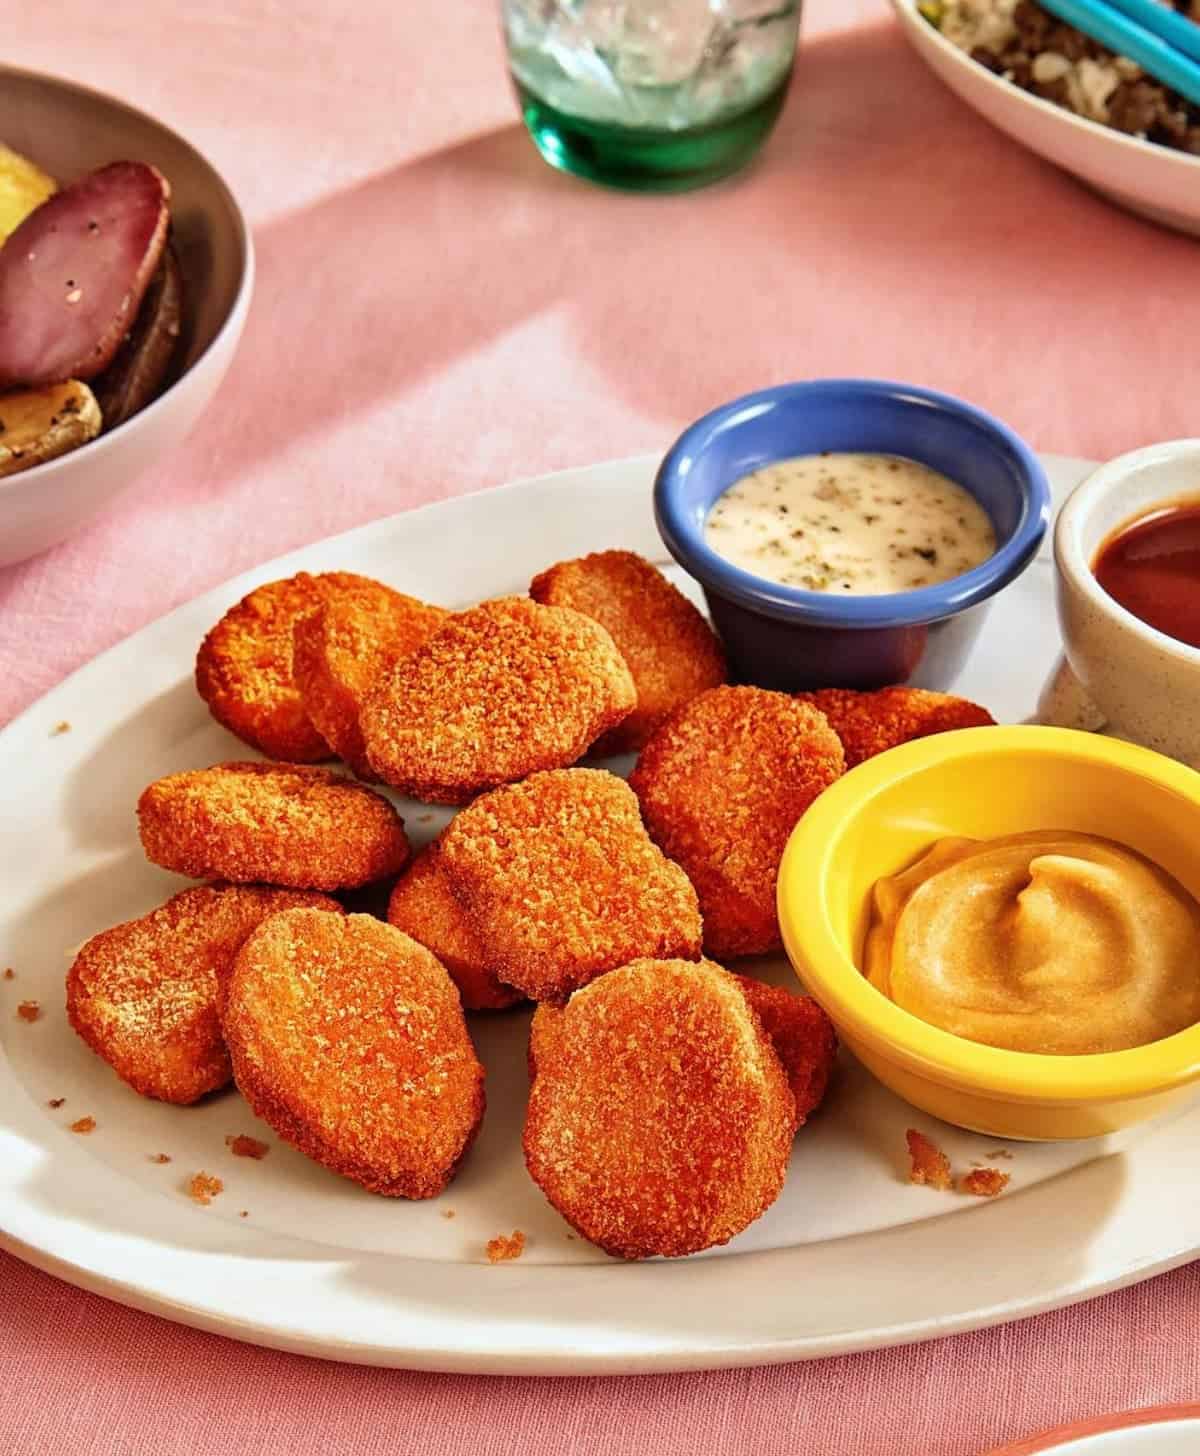 A plate of Impossible Foods brand plant-based chicken nuggets.